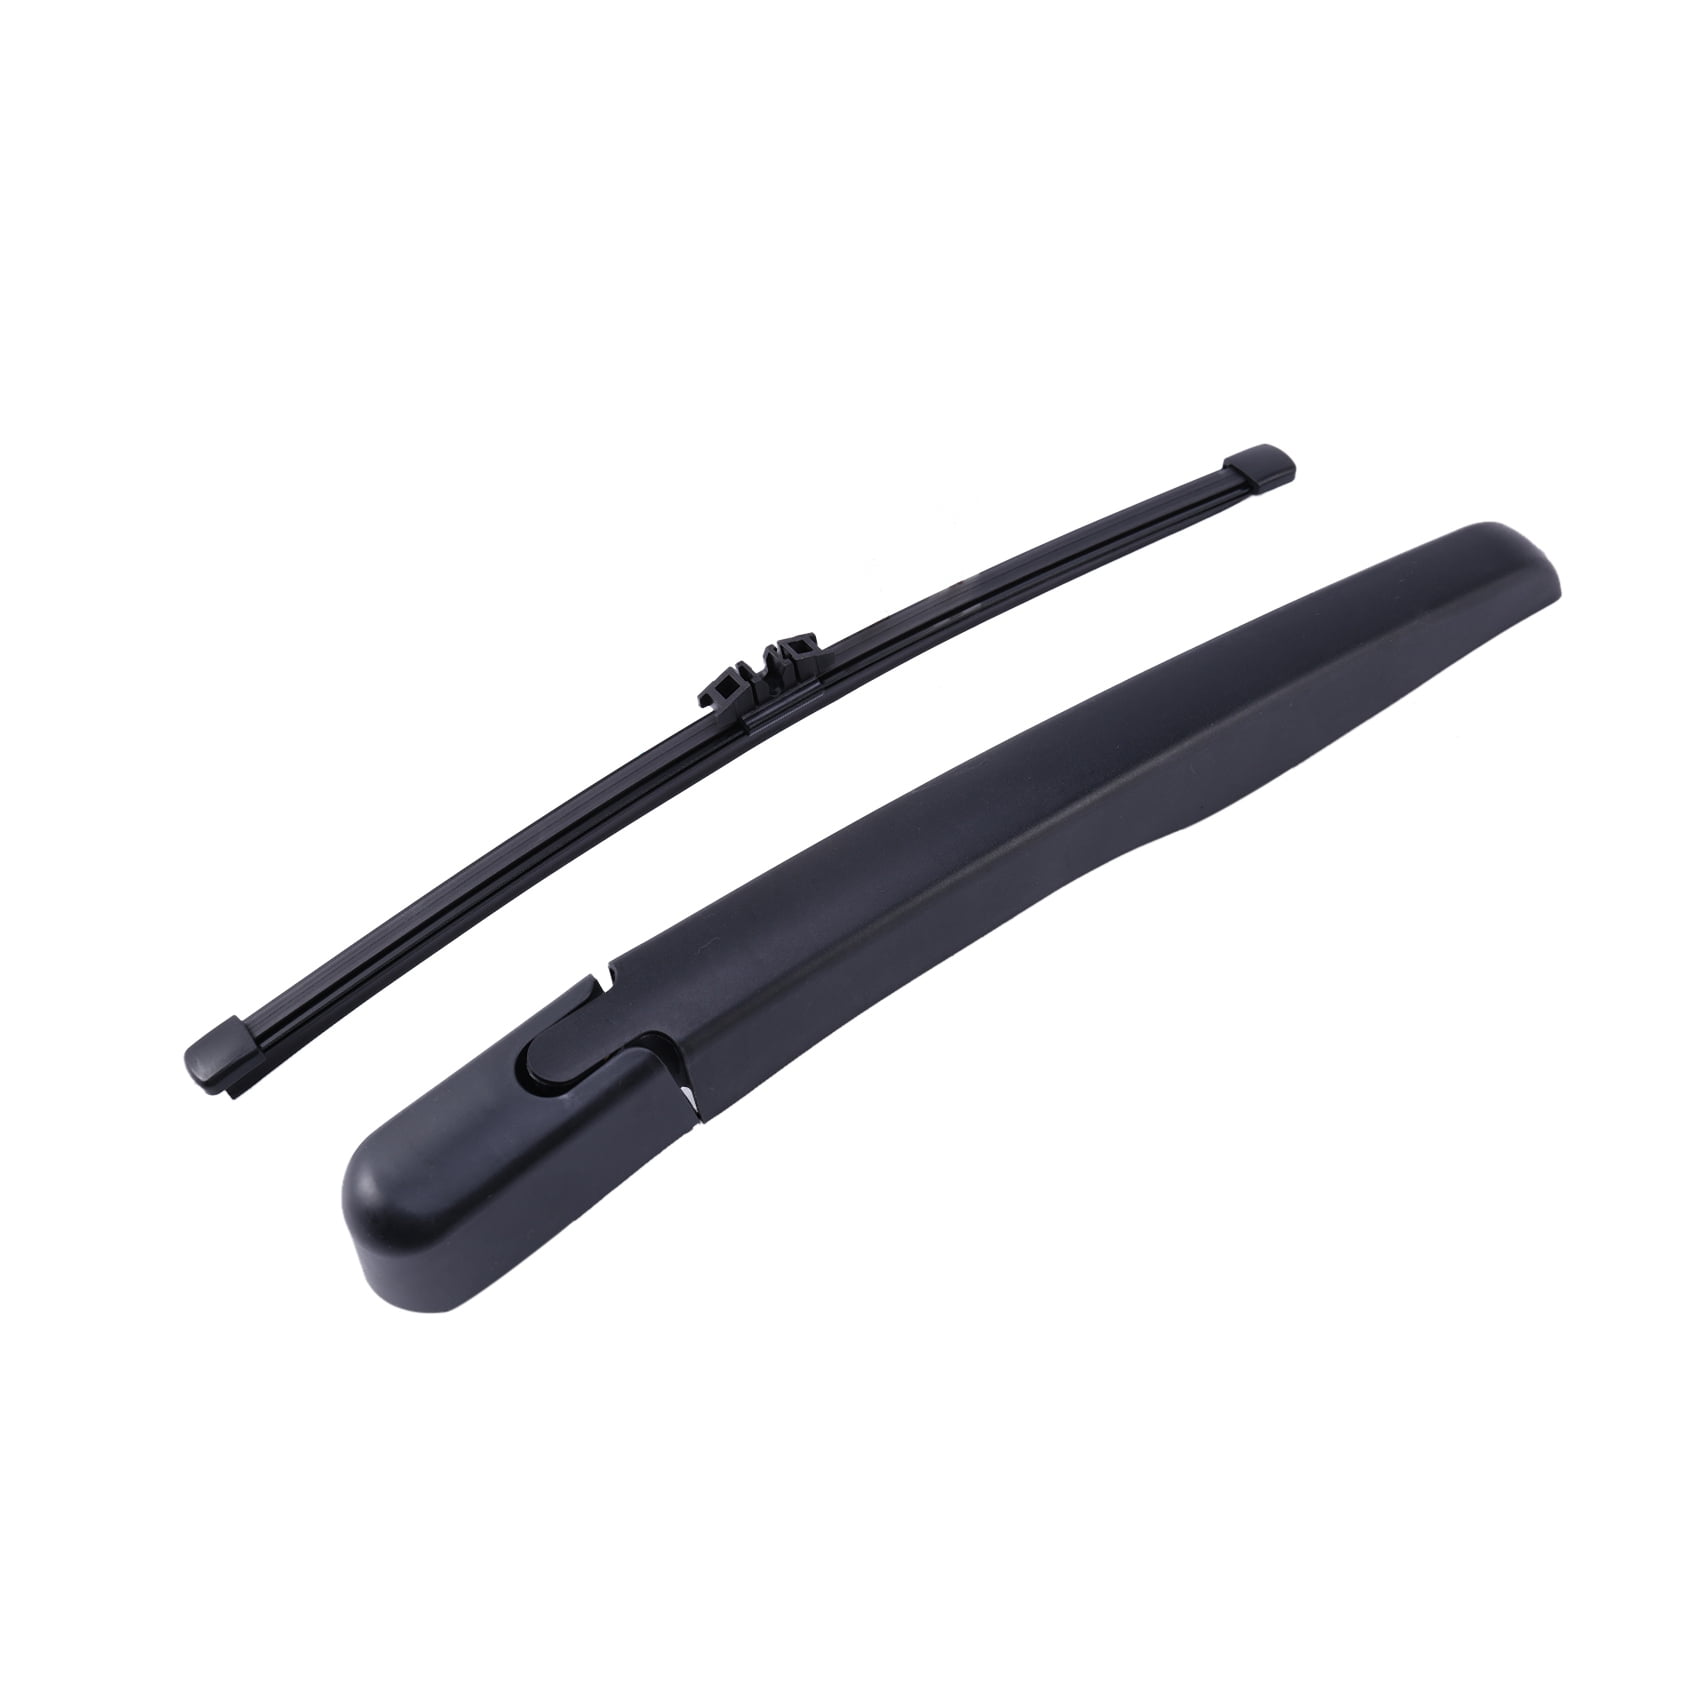 Ford Kuga 2013-2017,Lincoln MKX 2016-2017; Rear Wiper Blade:12 Rear Windshield Wiper Arm with Blade For Ford Escape 2013-2016,Explorer 2011-2017 